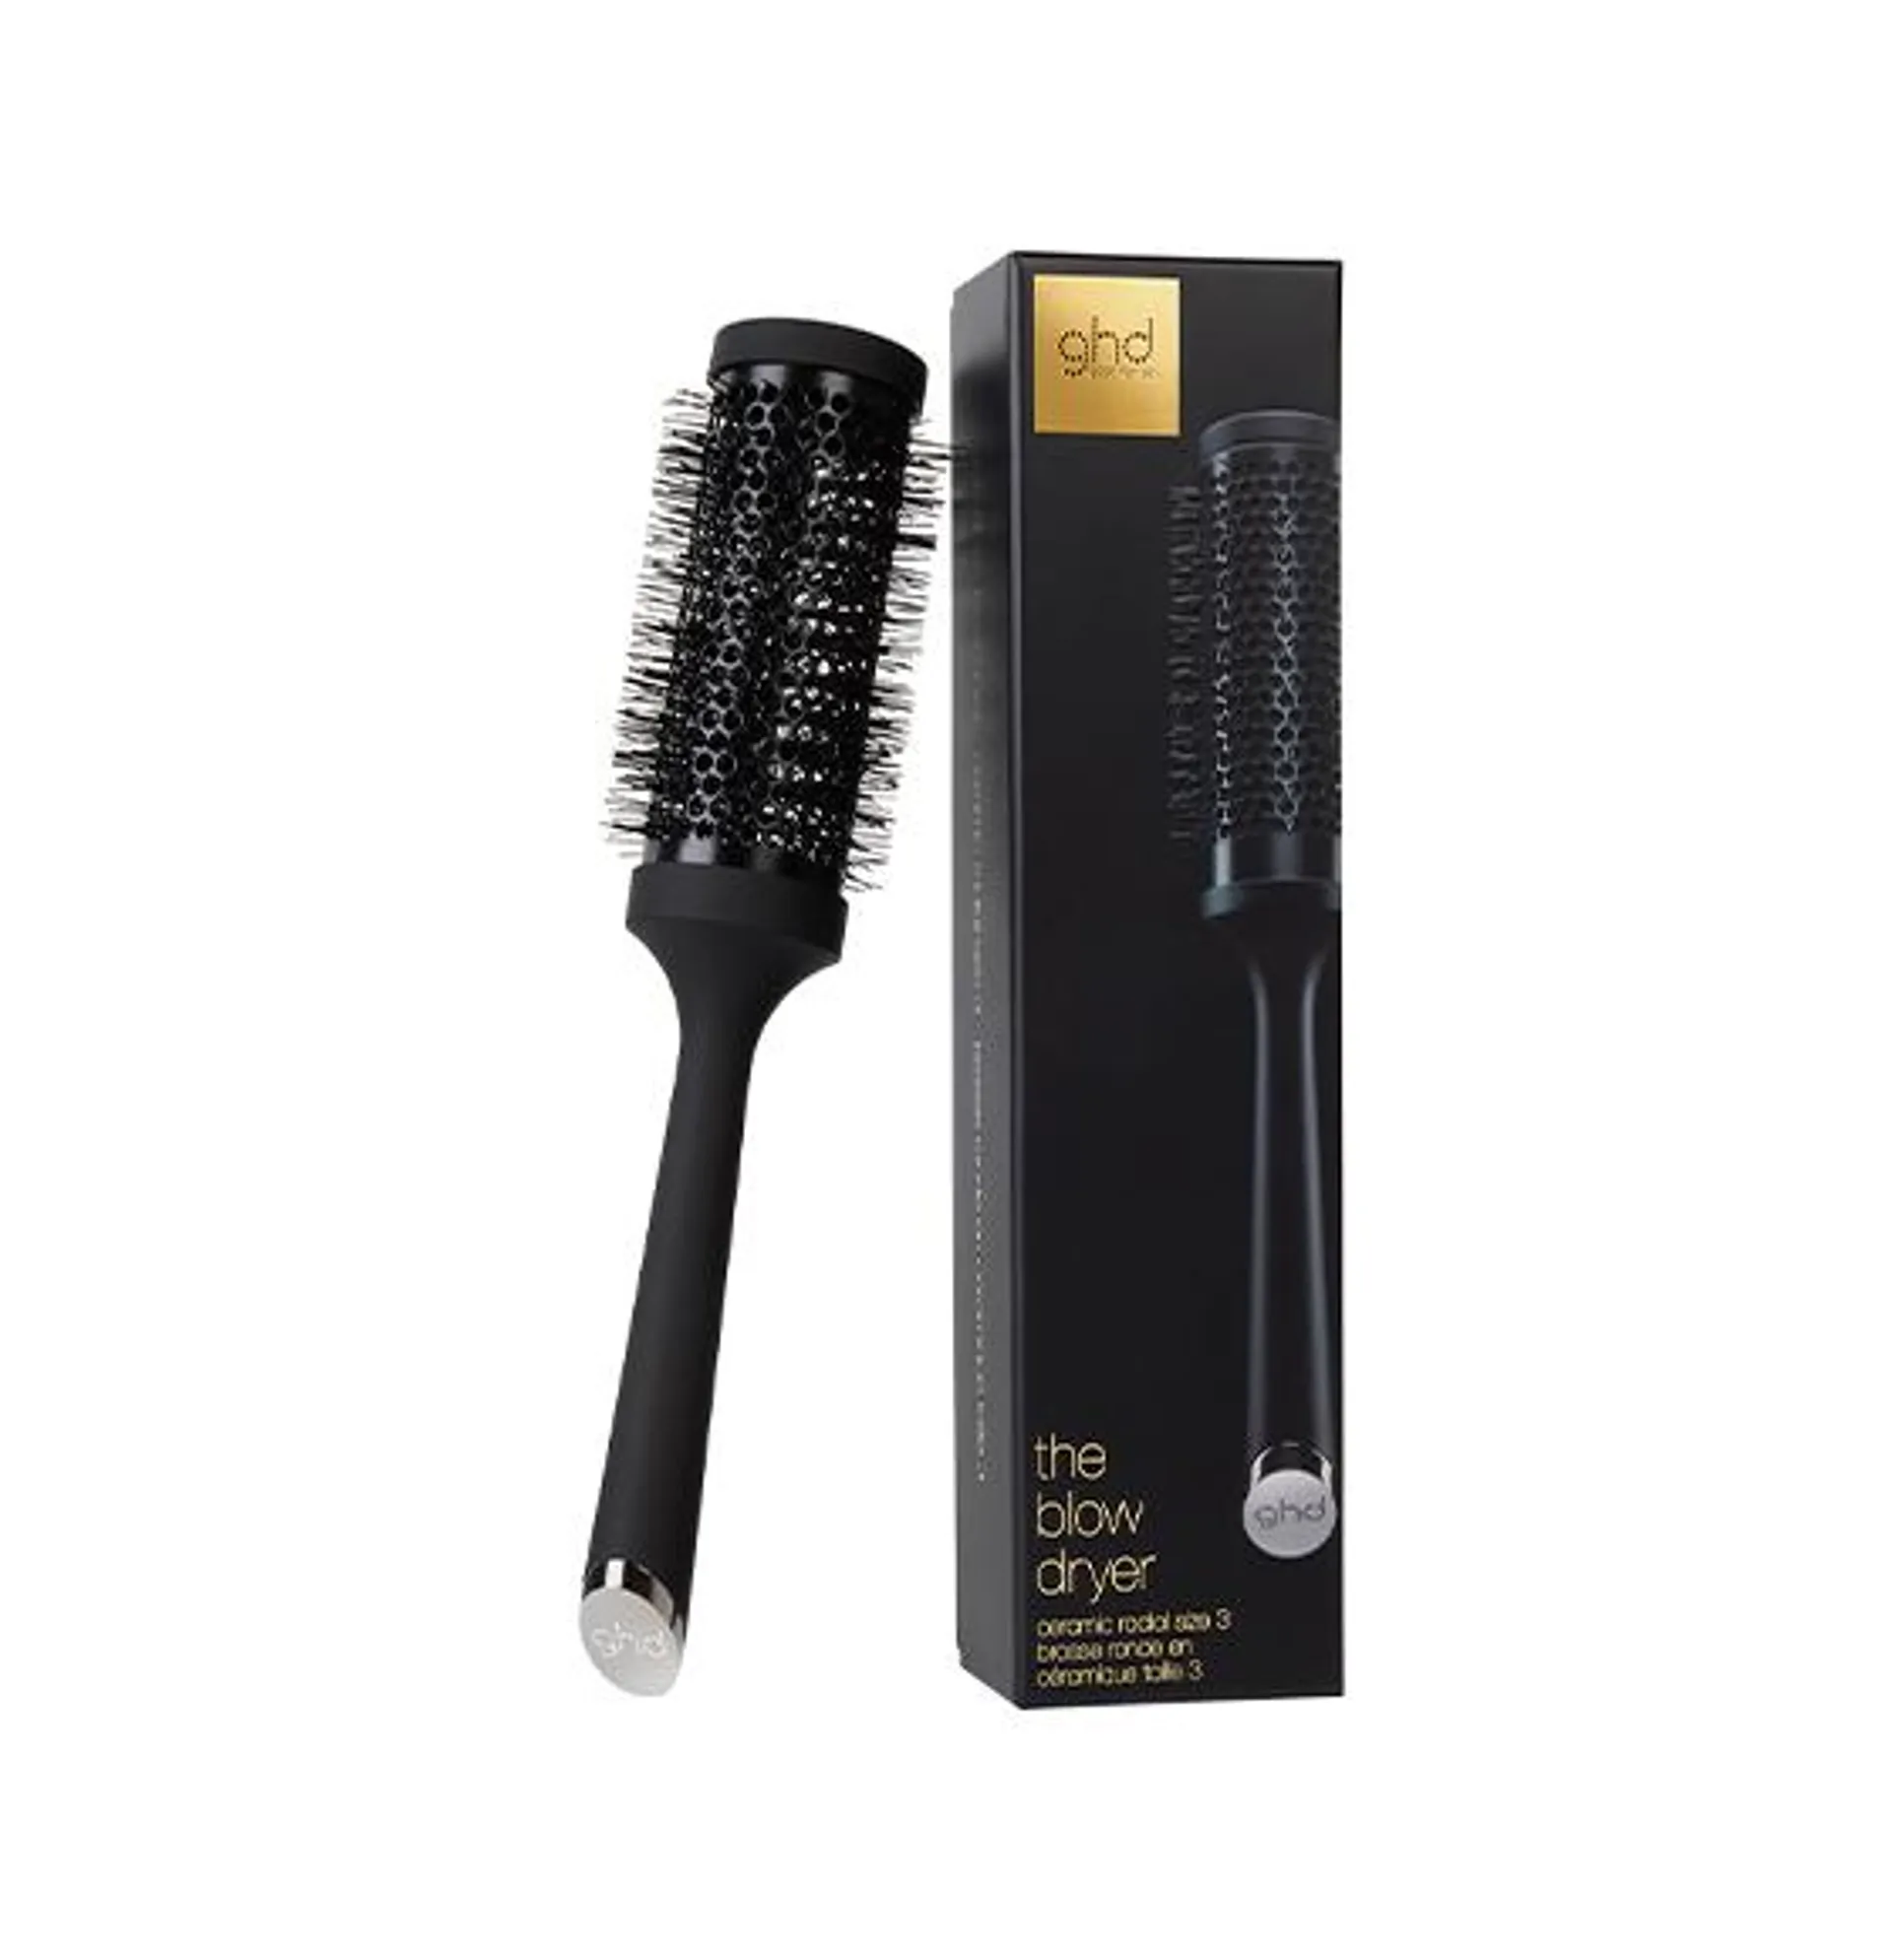 ghd The Blow Dryer Brush Size 3